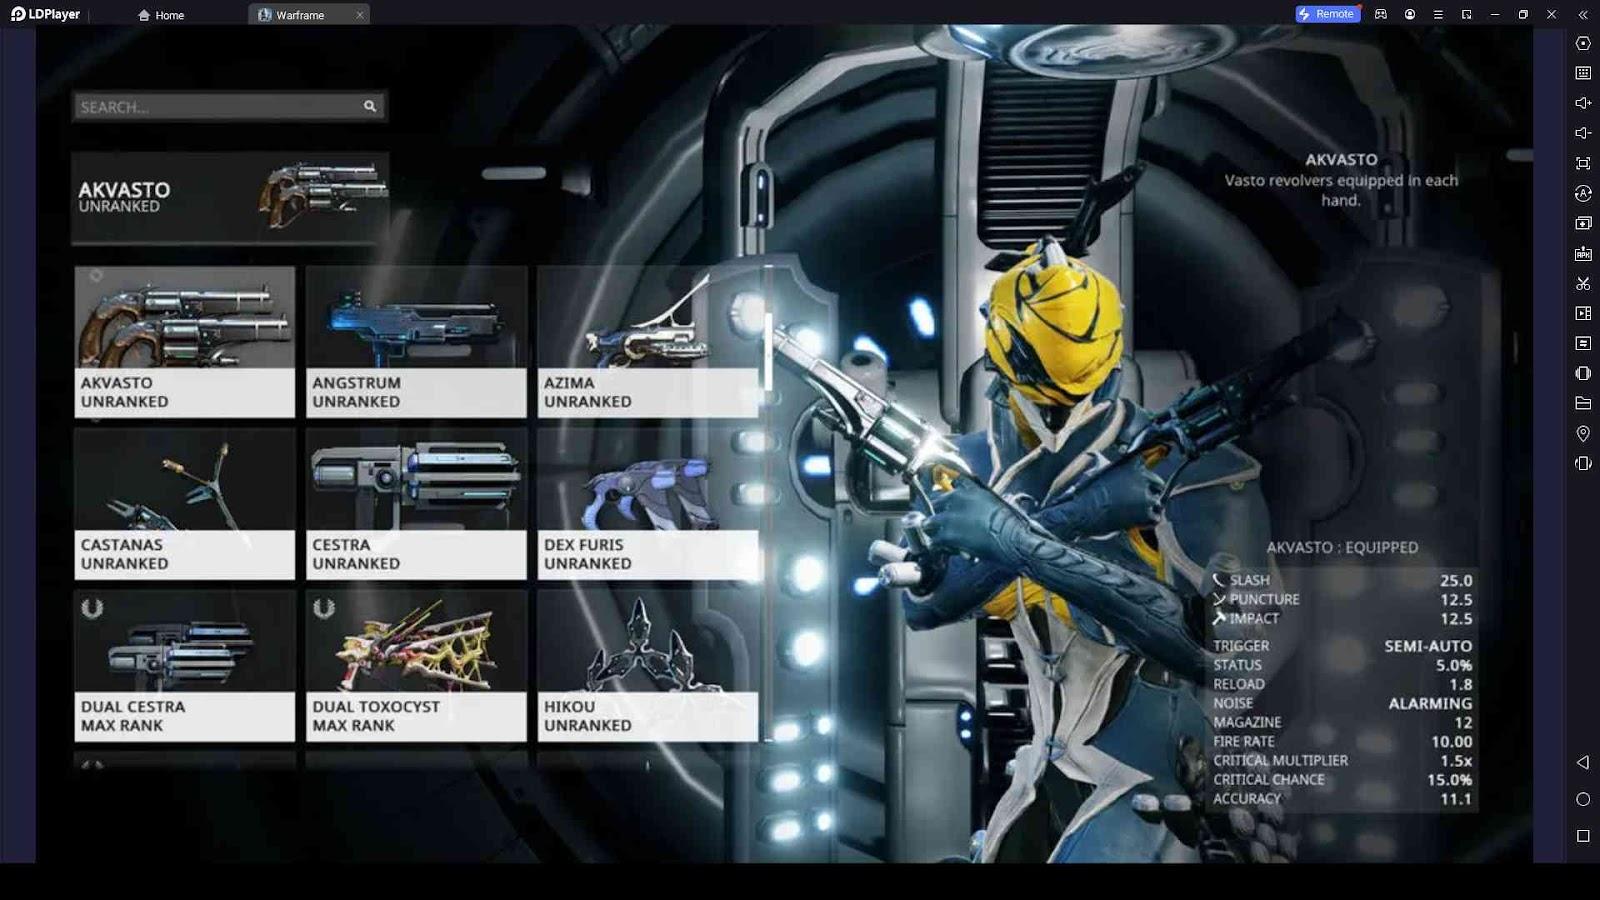 Enhancing the Warframes as well as the Weapons